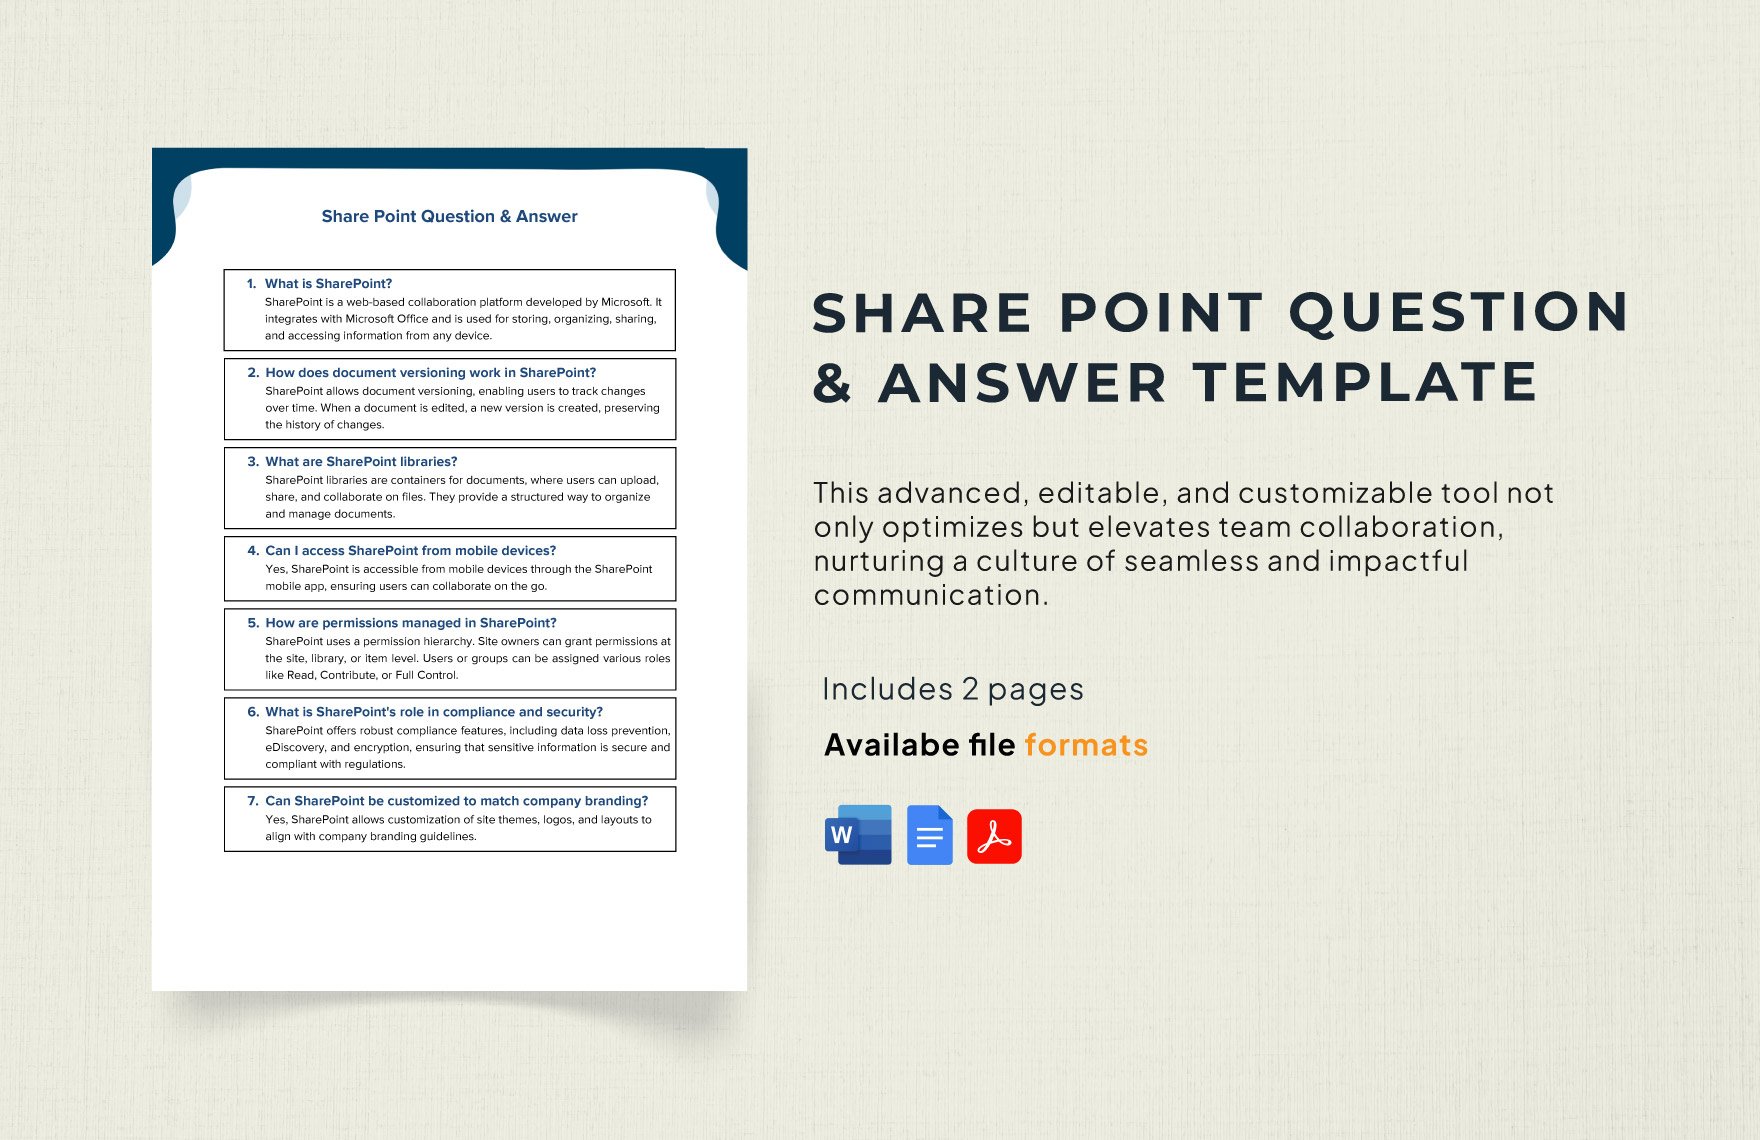 Free Share Point Question & Answer Template in Word, Google Docs, PDF